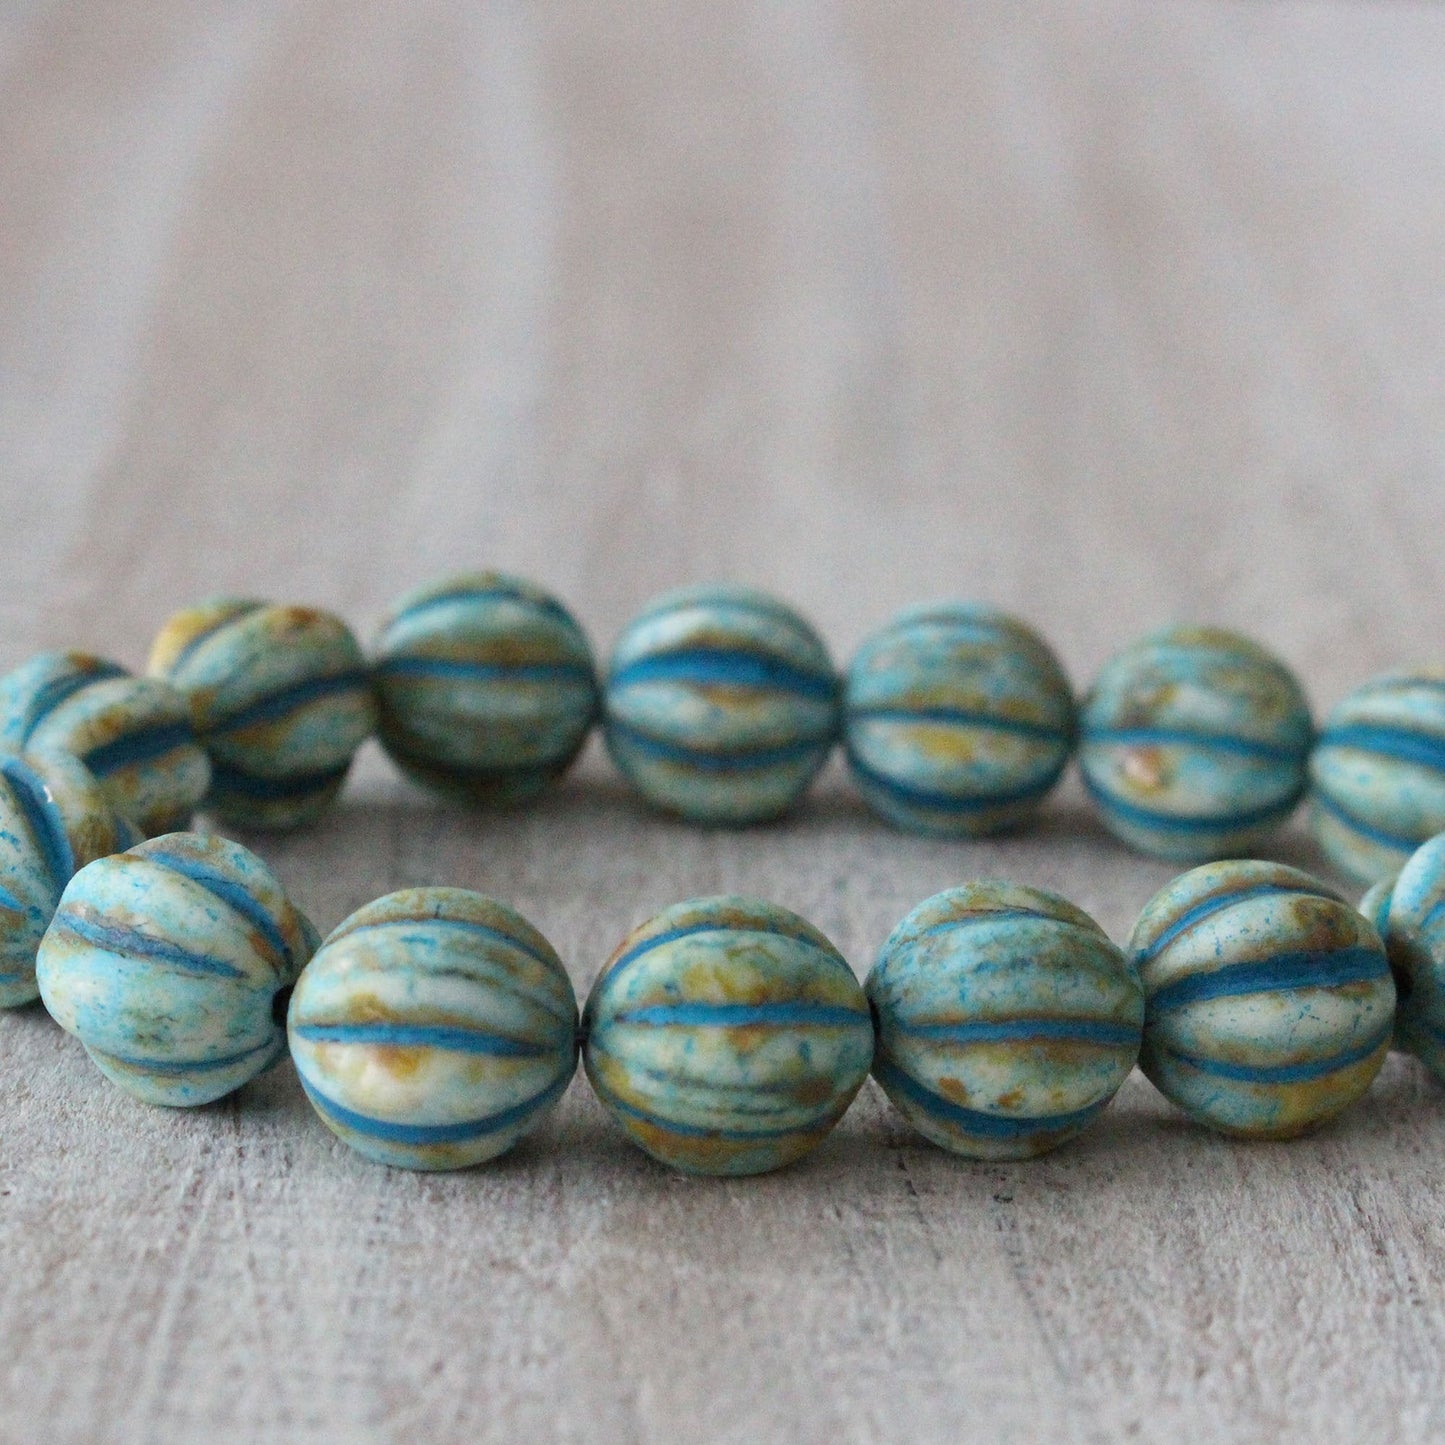 10mm Melon Beads - Aged Ivory with Turquoise - 15 Beads